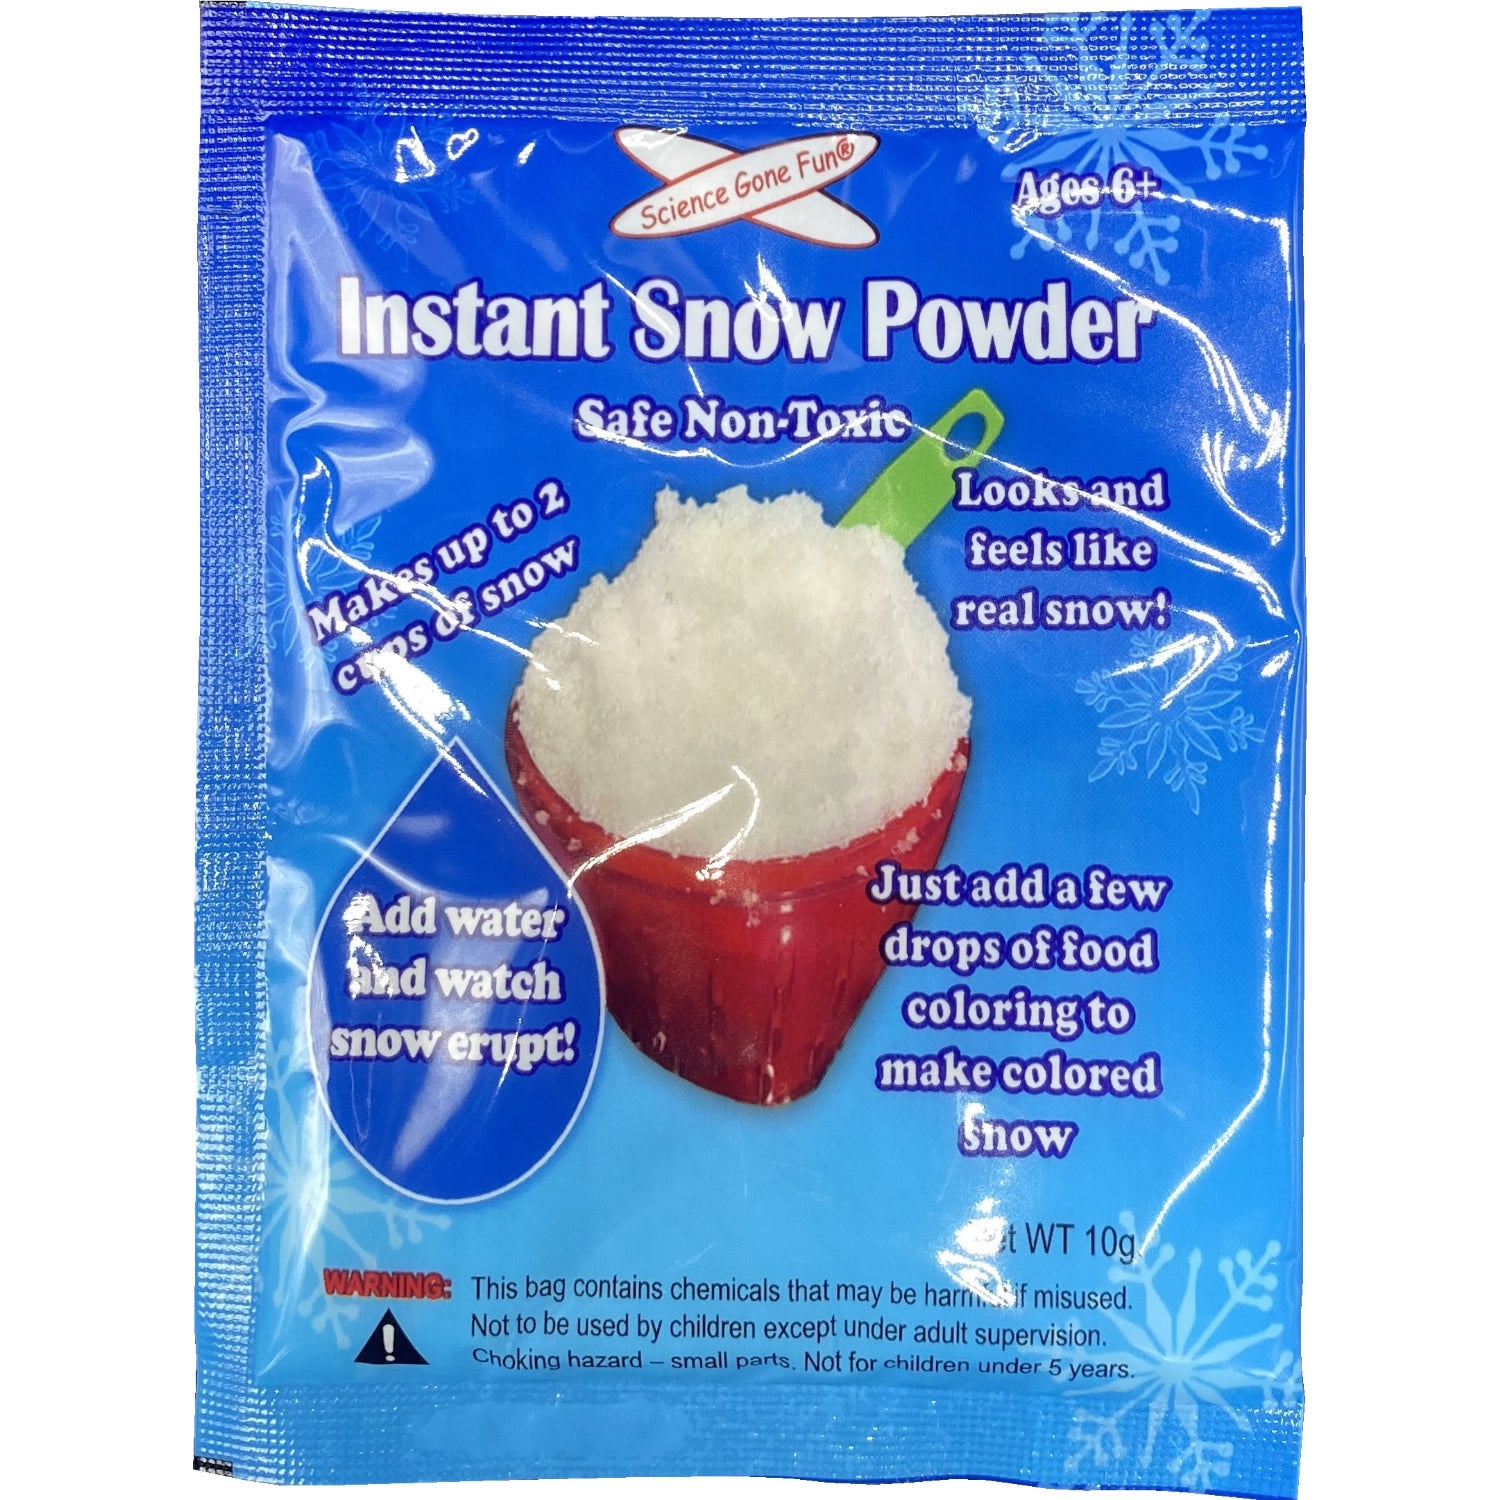 60-Pack of 10g. Instant Snow Powder